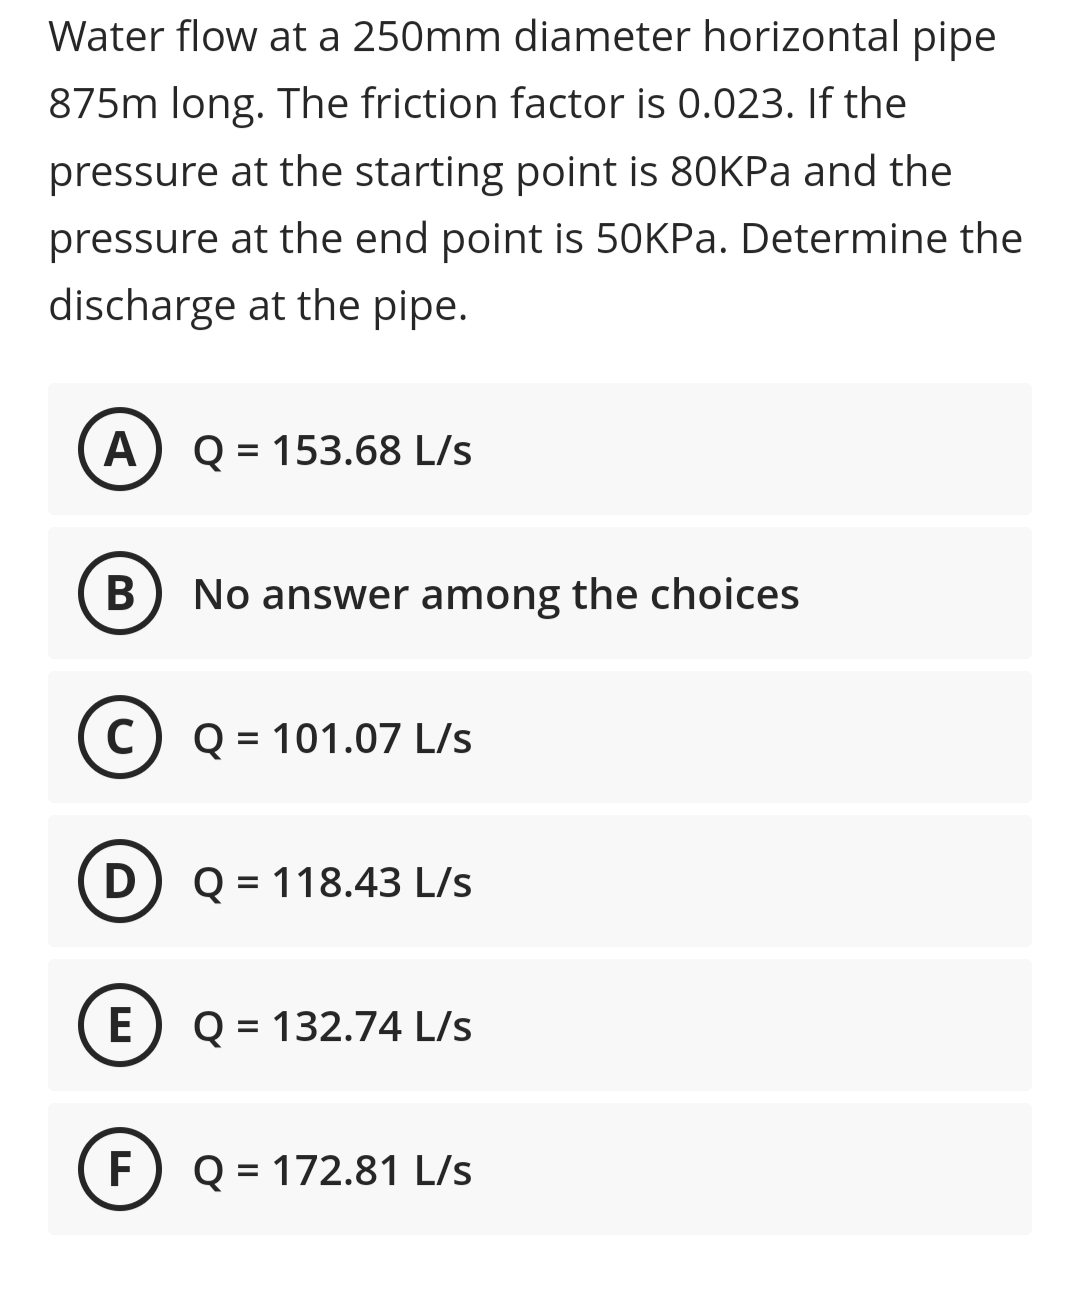 Water flow at a 250mm diameter horizontal pipe
875m long. The friction factor is 0.023. If the
pressure at the starting point is 80KPA and the
pressure at the end point is 50KPA. Determine the
discharge at the pipe.
A
Q = 153.68 L/s
В
No answer among the choices
C) Q = 101.07 L/s
D) Q = 118.43 L/s
E
Q = 132.74 L/s
F
Q = 172.81 L/s
%3D
